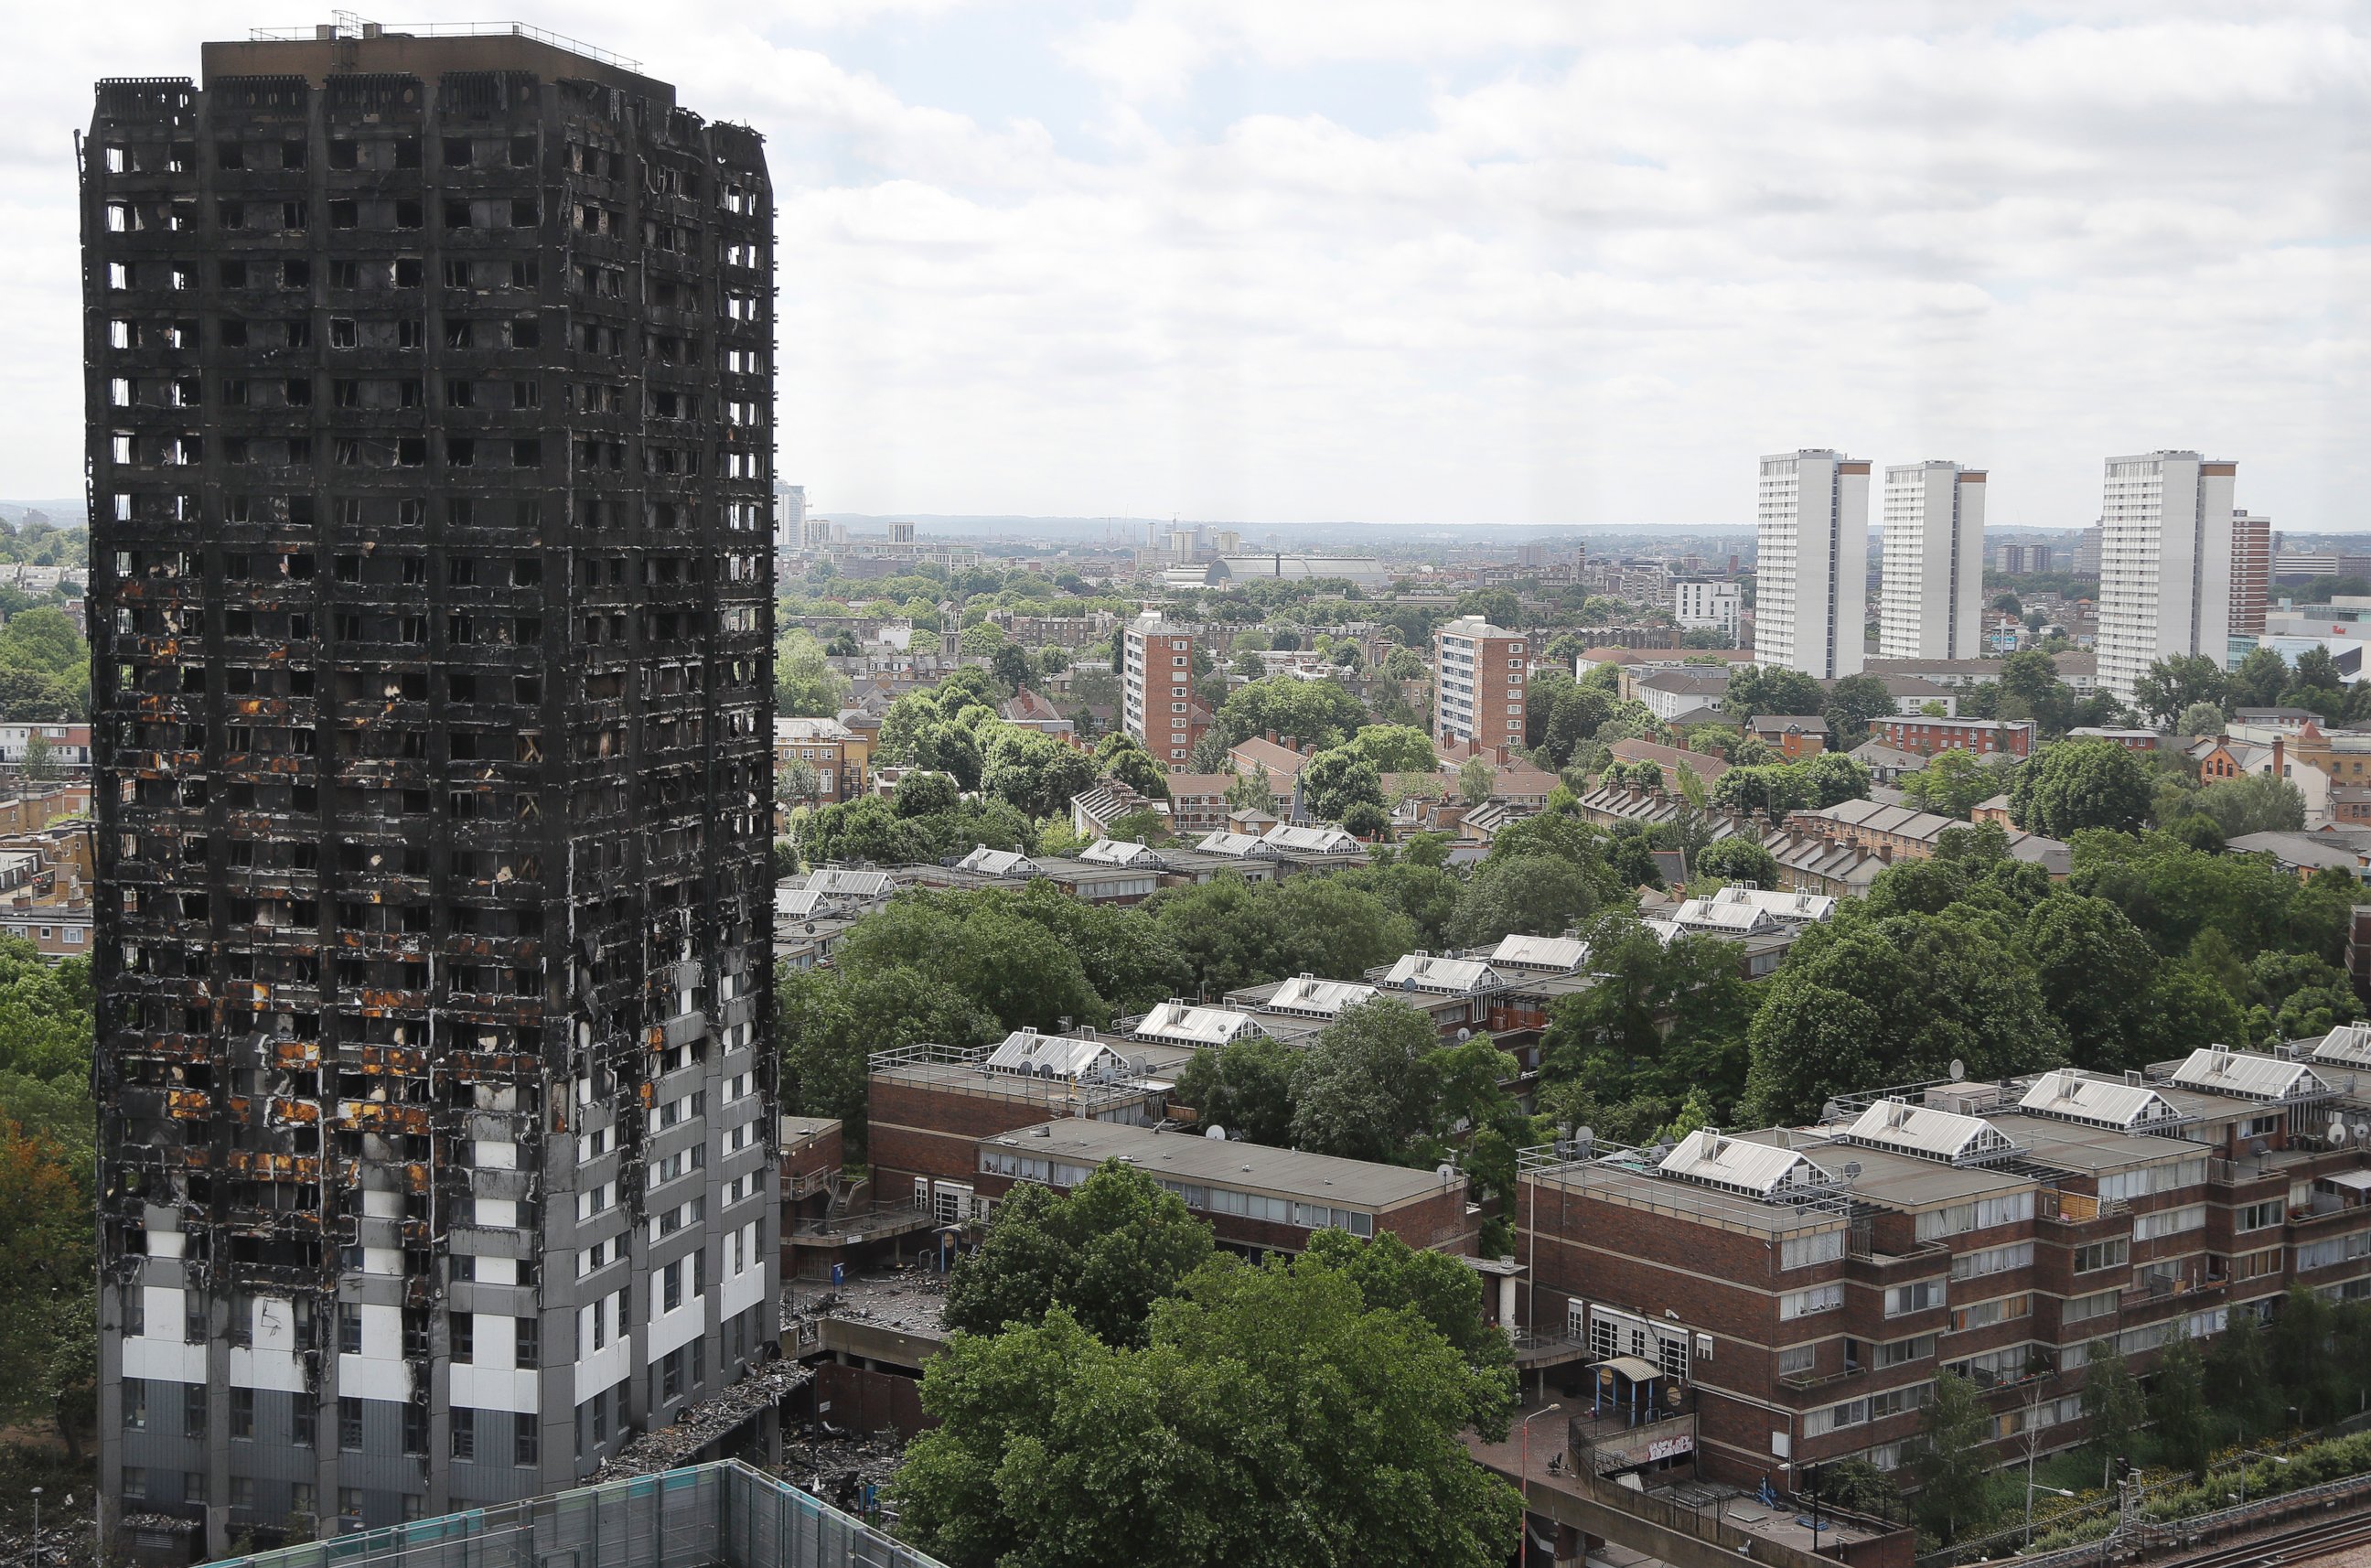 PHOTO: The burnt Grenfell Tower apartment building stands after a devastating fire in London, June 23, 2017.